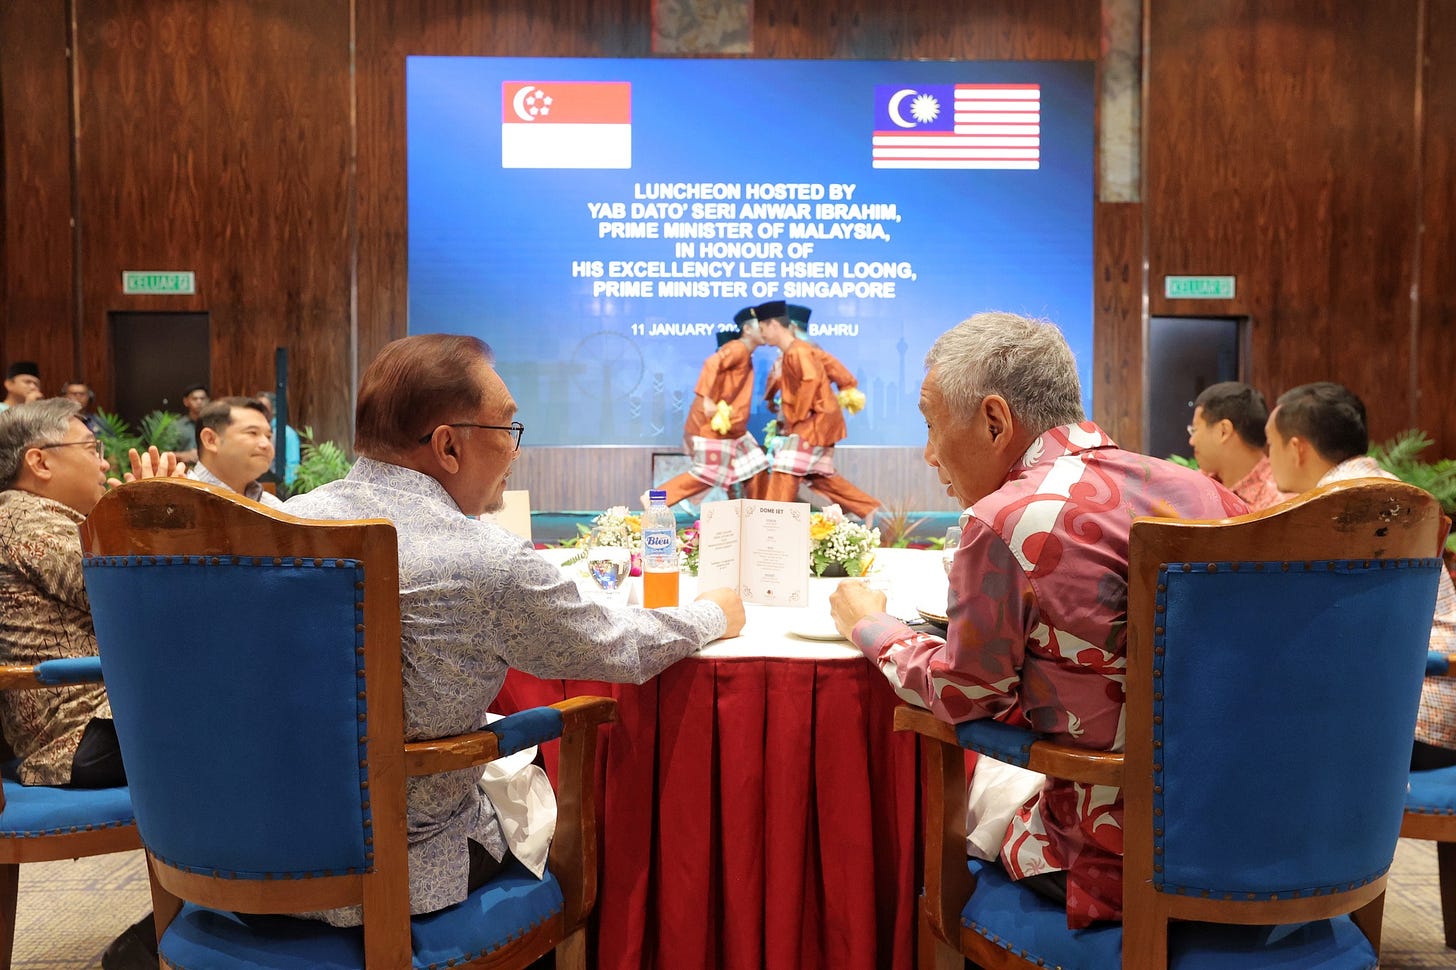 May be an image of 7 people and text that says "። KE LUNCHEON HOSTED BY YAB DATO' SERI ANWAR IBRAHIM, PRIME MALAYSIA, HONOUR HIS EXCELLENCY LENCY HSIEN LOONG, PRIME MINISTERO SINGAPORE 1JANUARY YON BAHRU"